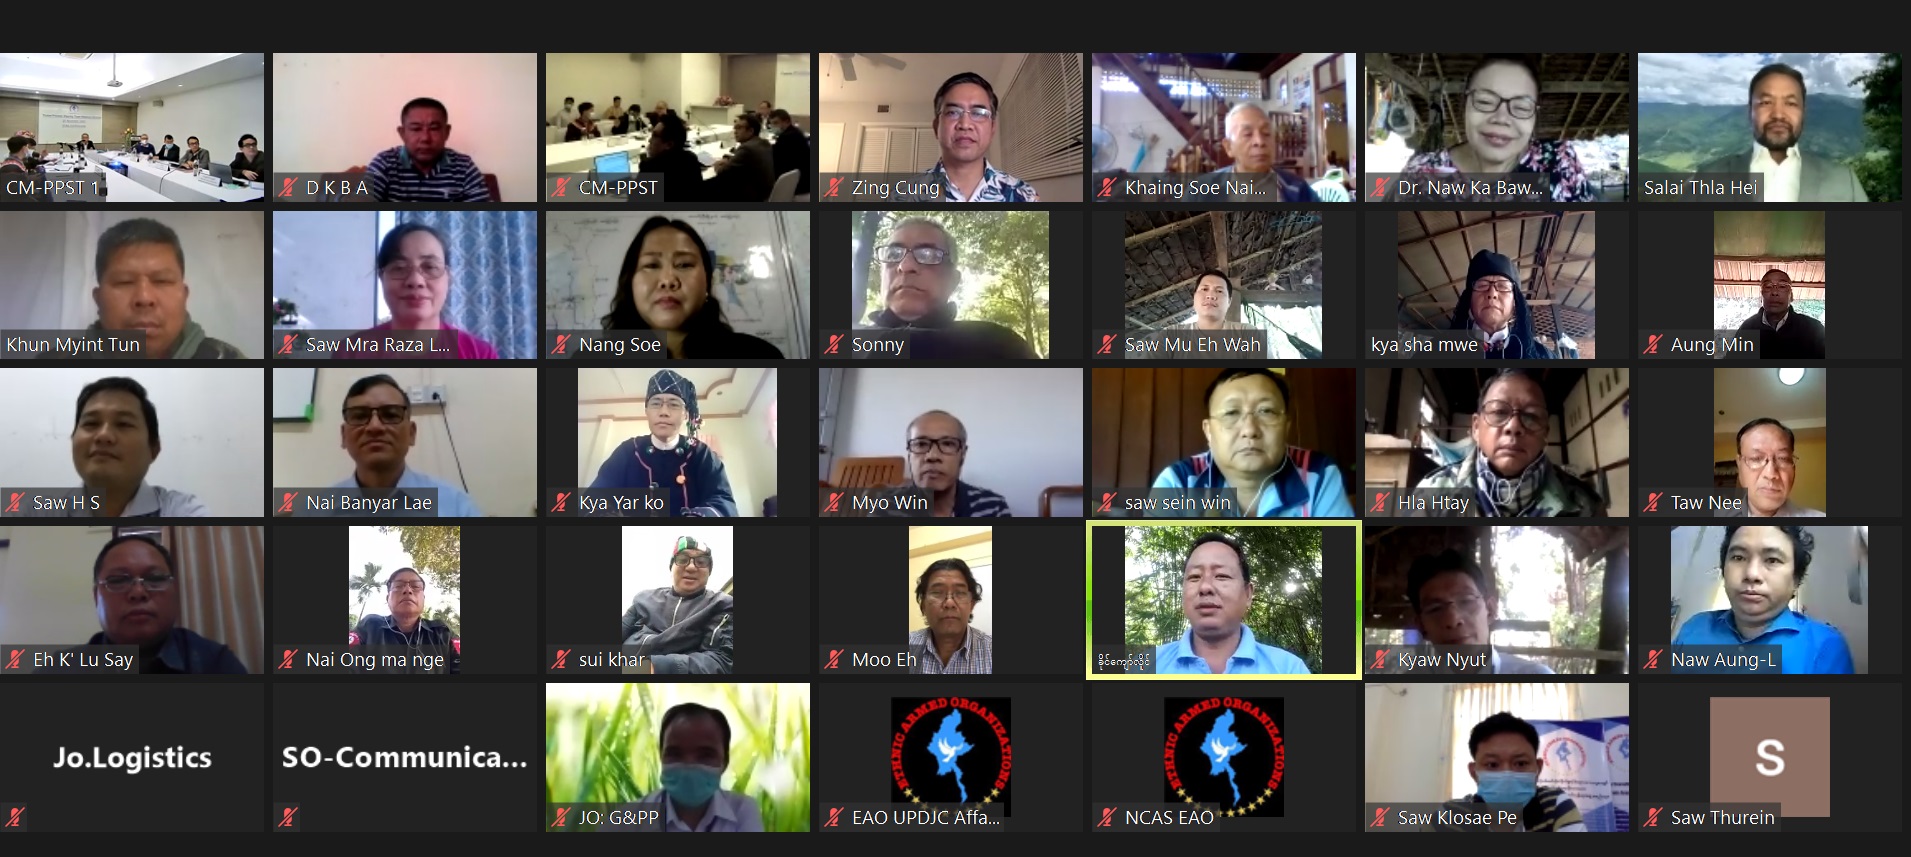 Peace Process Steering Team Meeting (12/ 2020) held through online video conference today